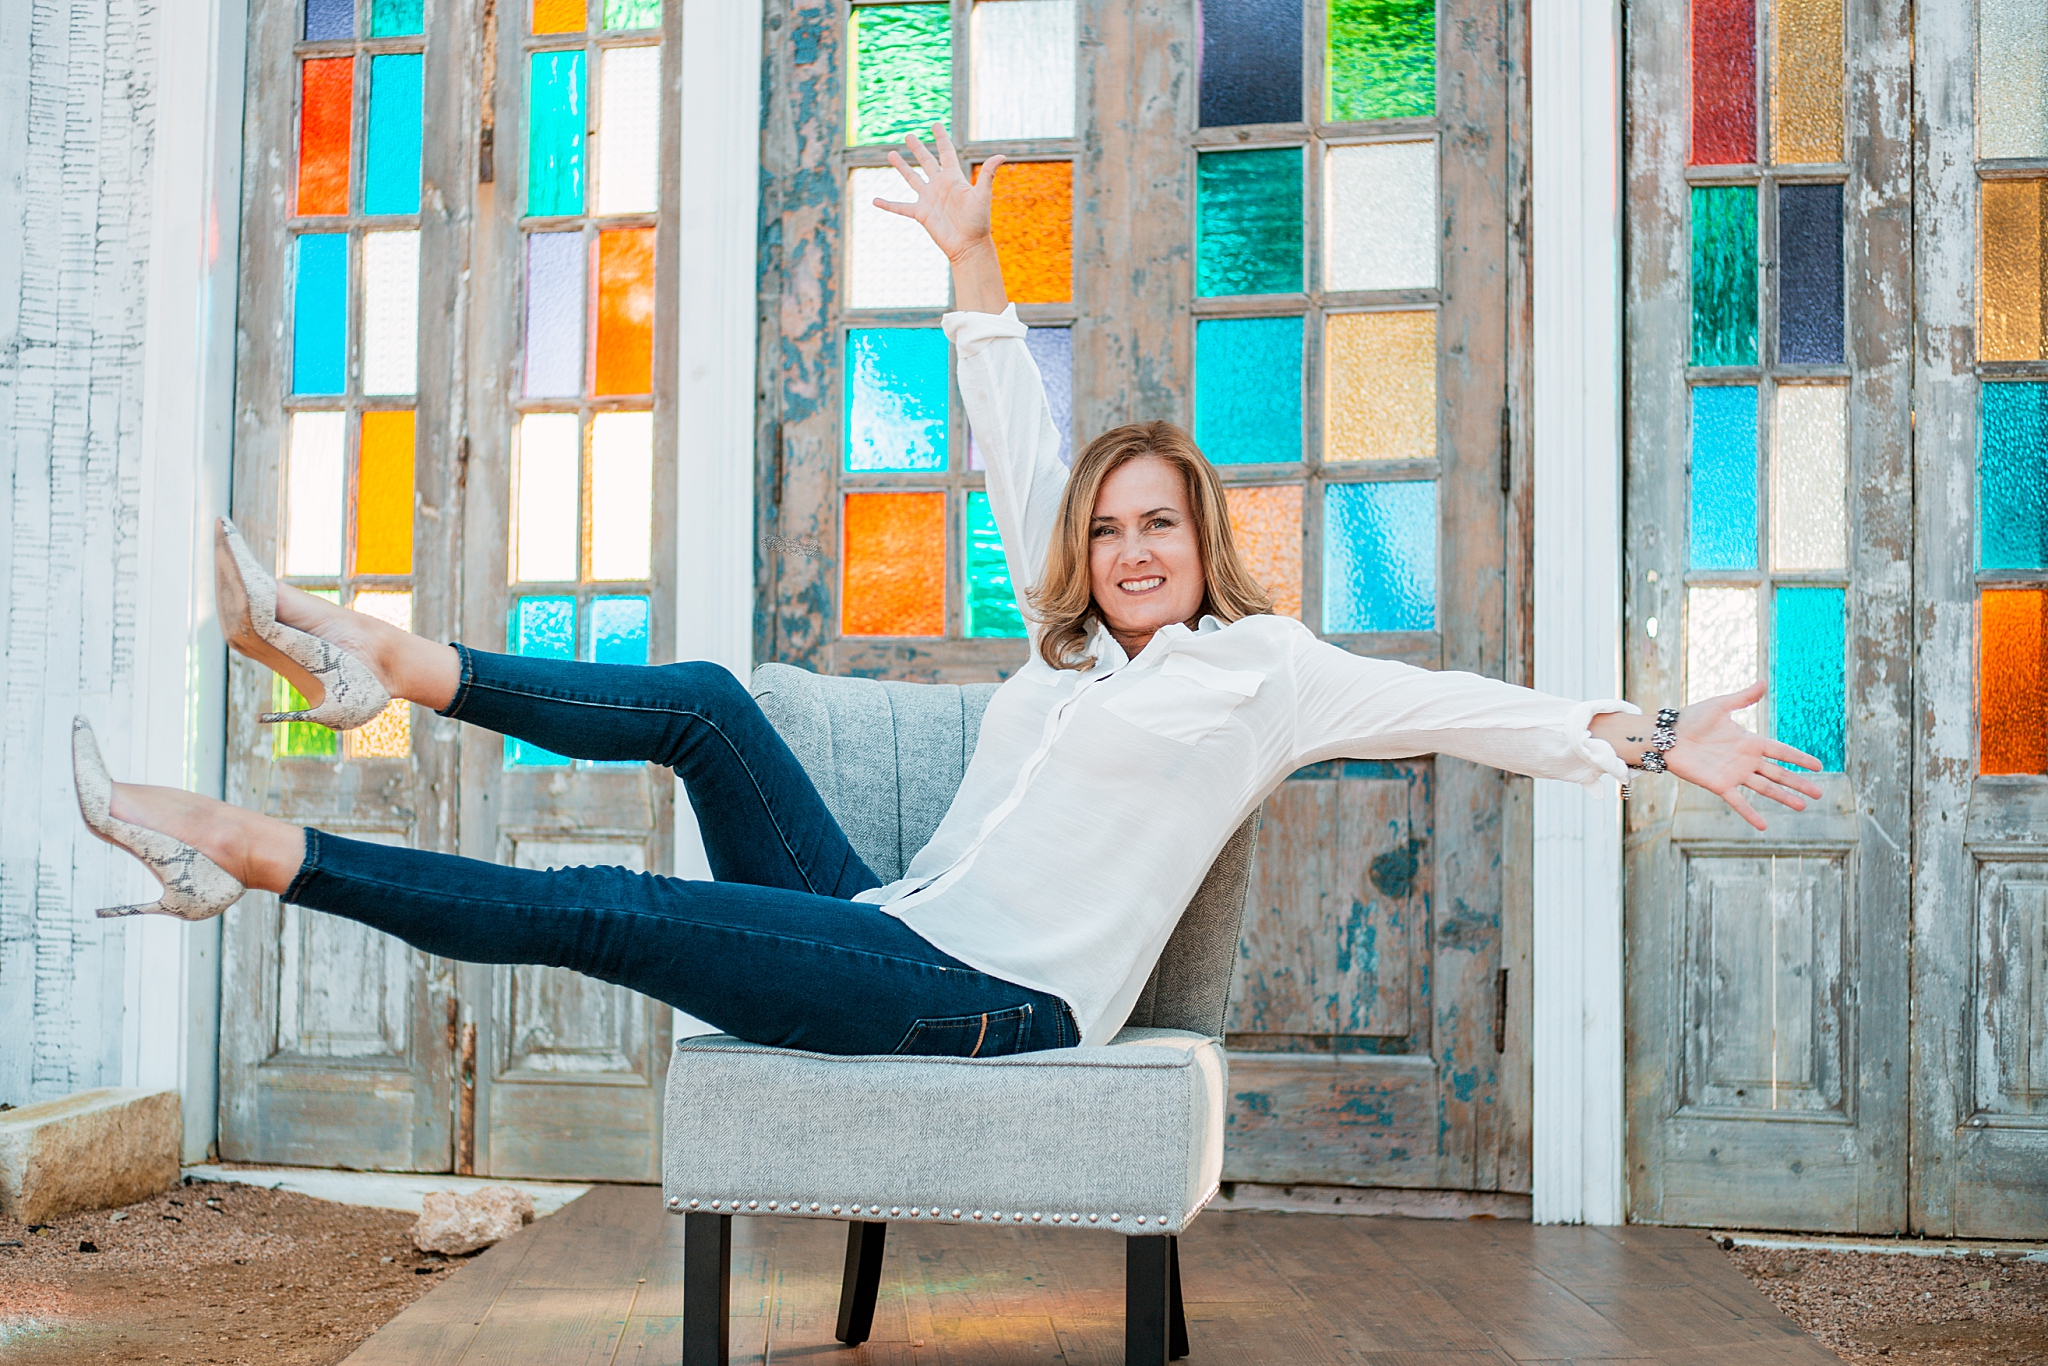 woman leans back in chair with arms and legs outstretched for brand photo shoot 